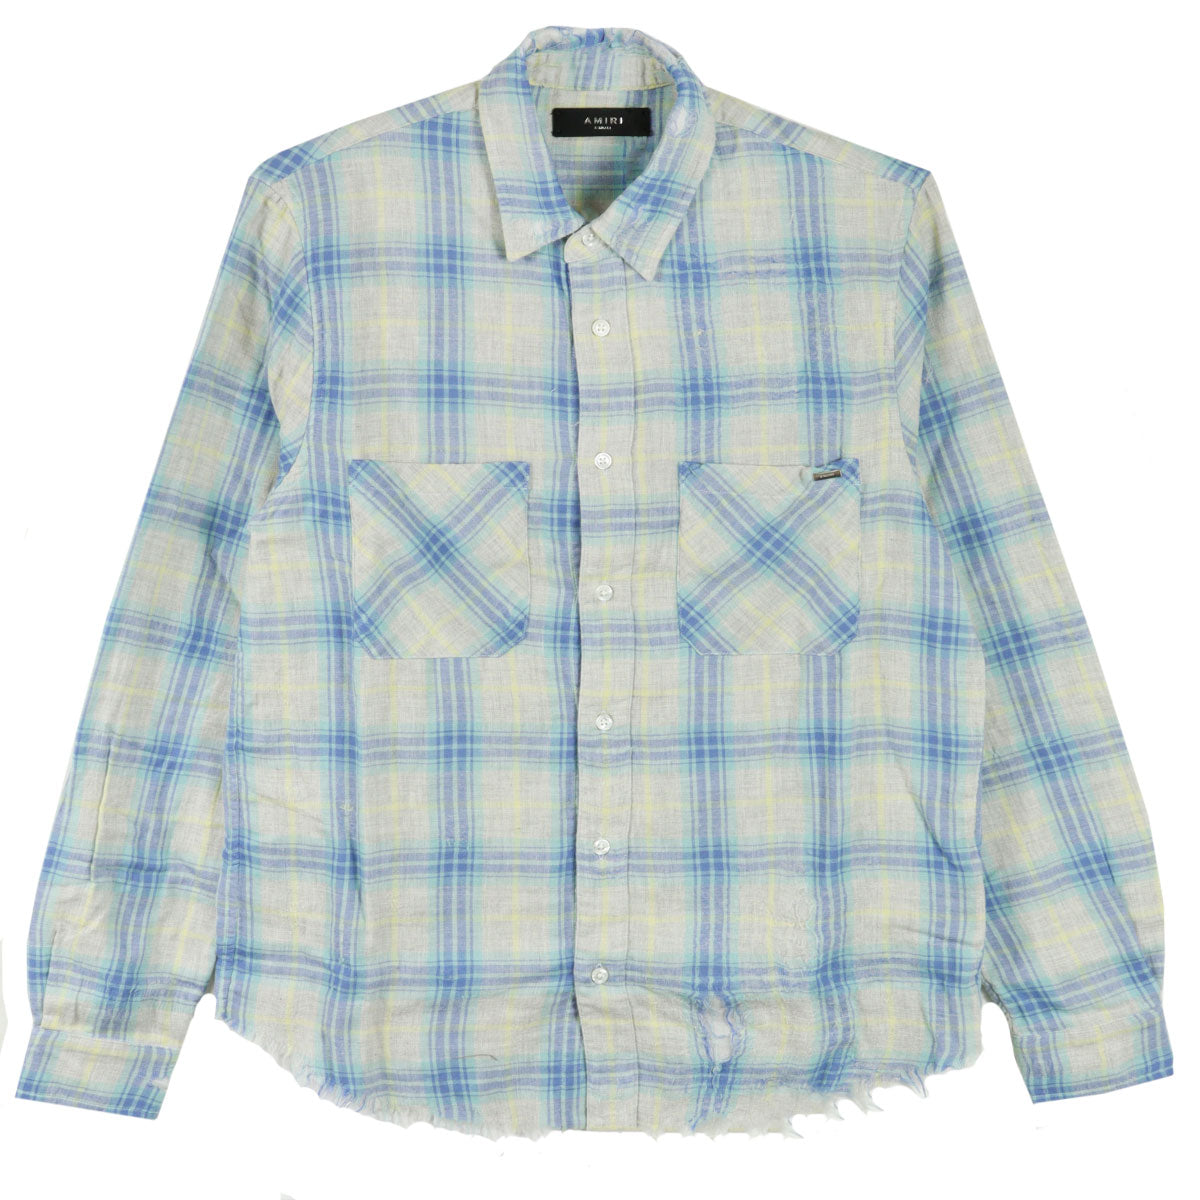 DOUBLE FACE DISTRESSED PLAID SHIRT - Why are you here?